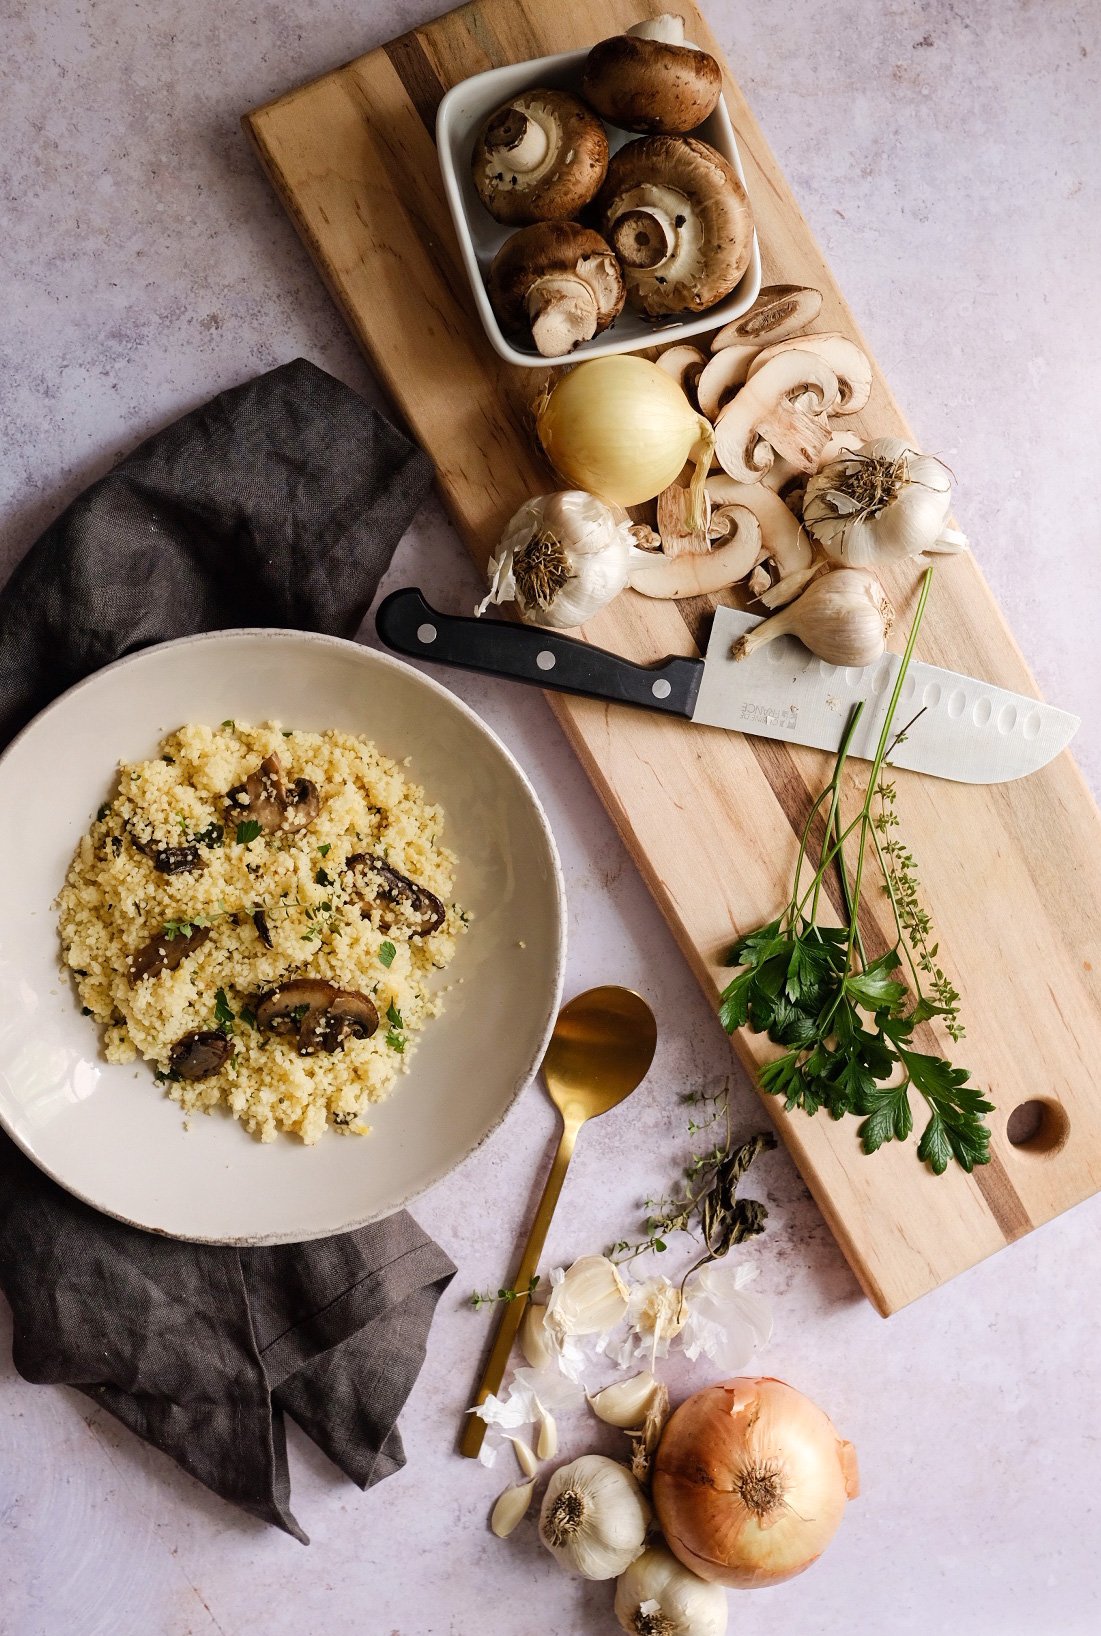 Lifestyle Blogger Chocolate and Lace shares her recipe for the Best Mushroom Herb Couscous.